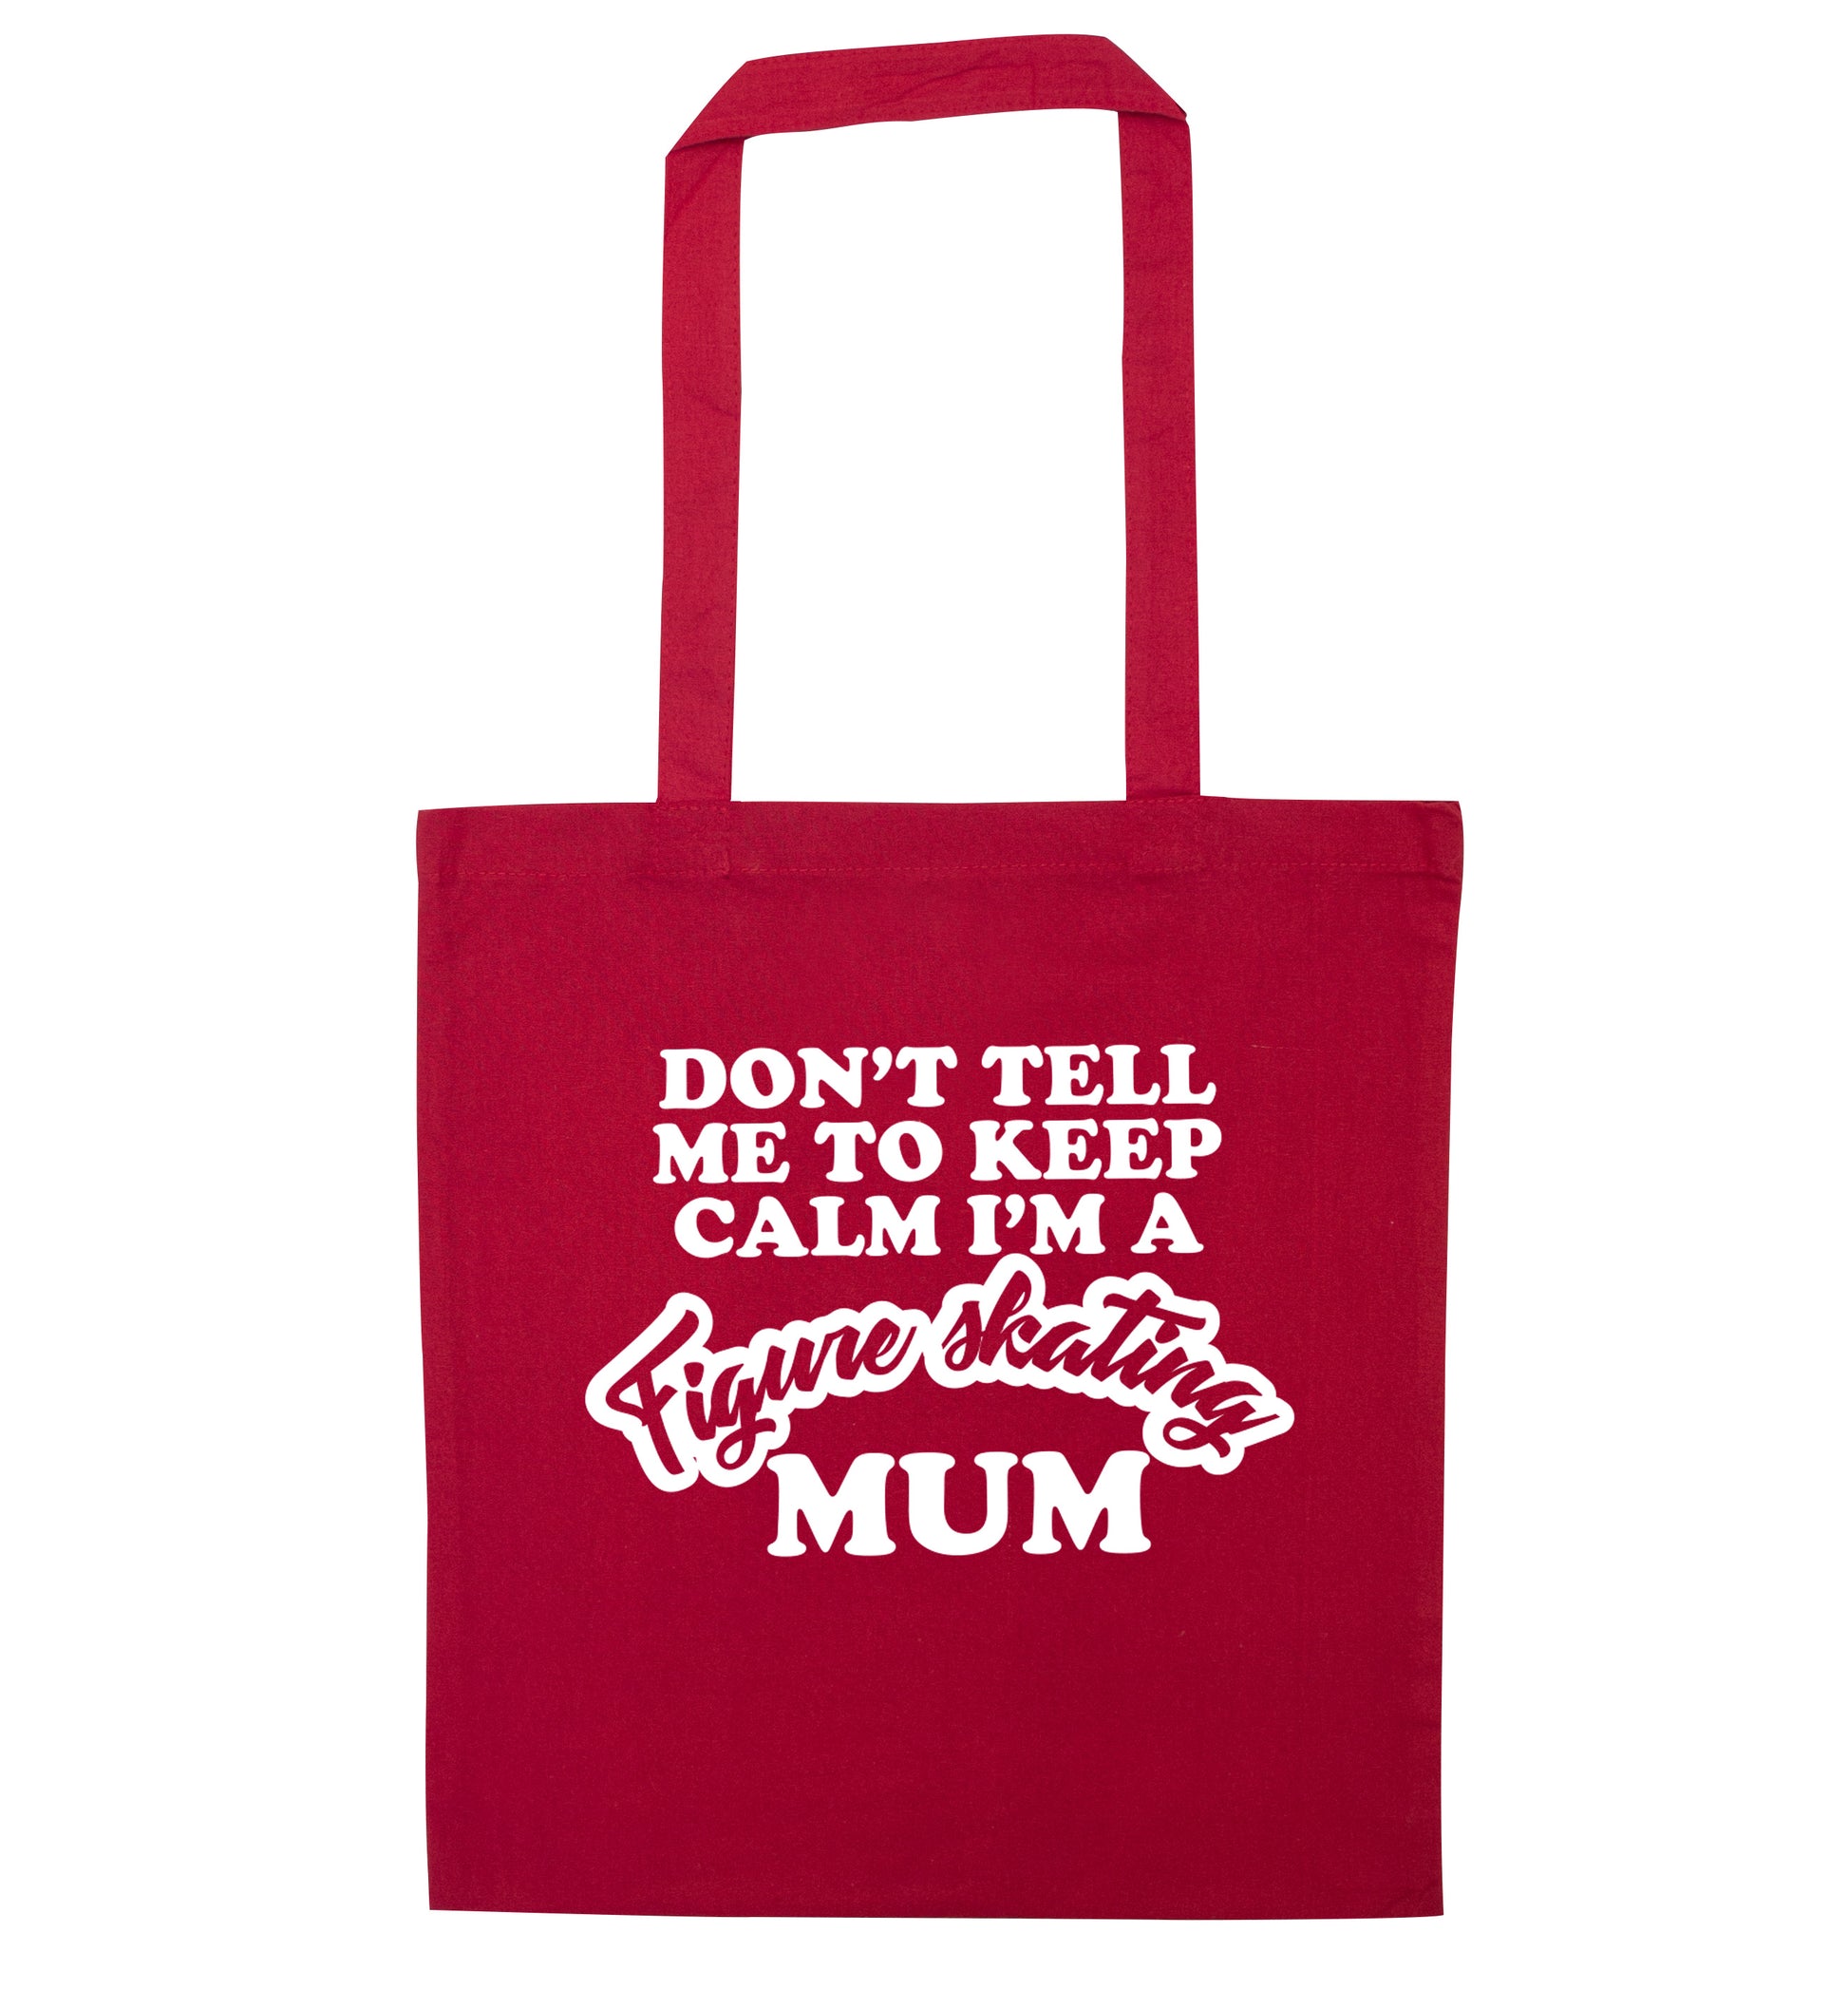 Don't tell me to keep calm I'm a figure skating mum red tote bag